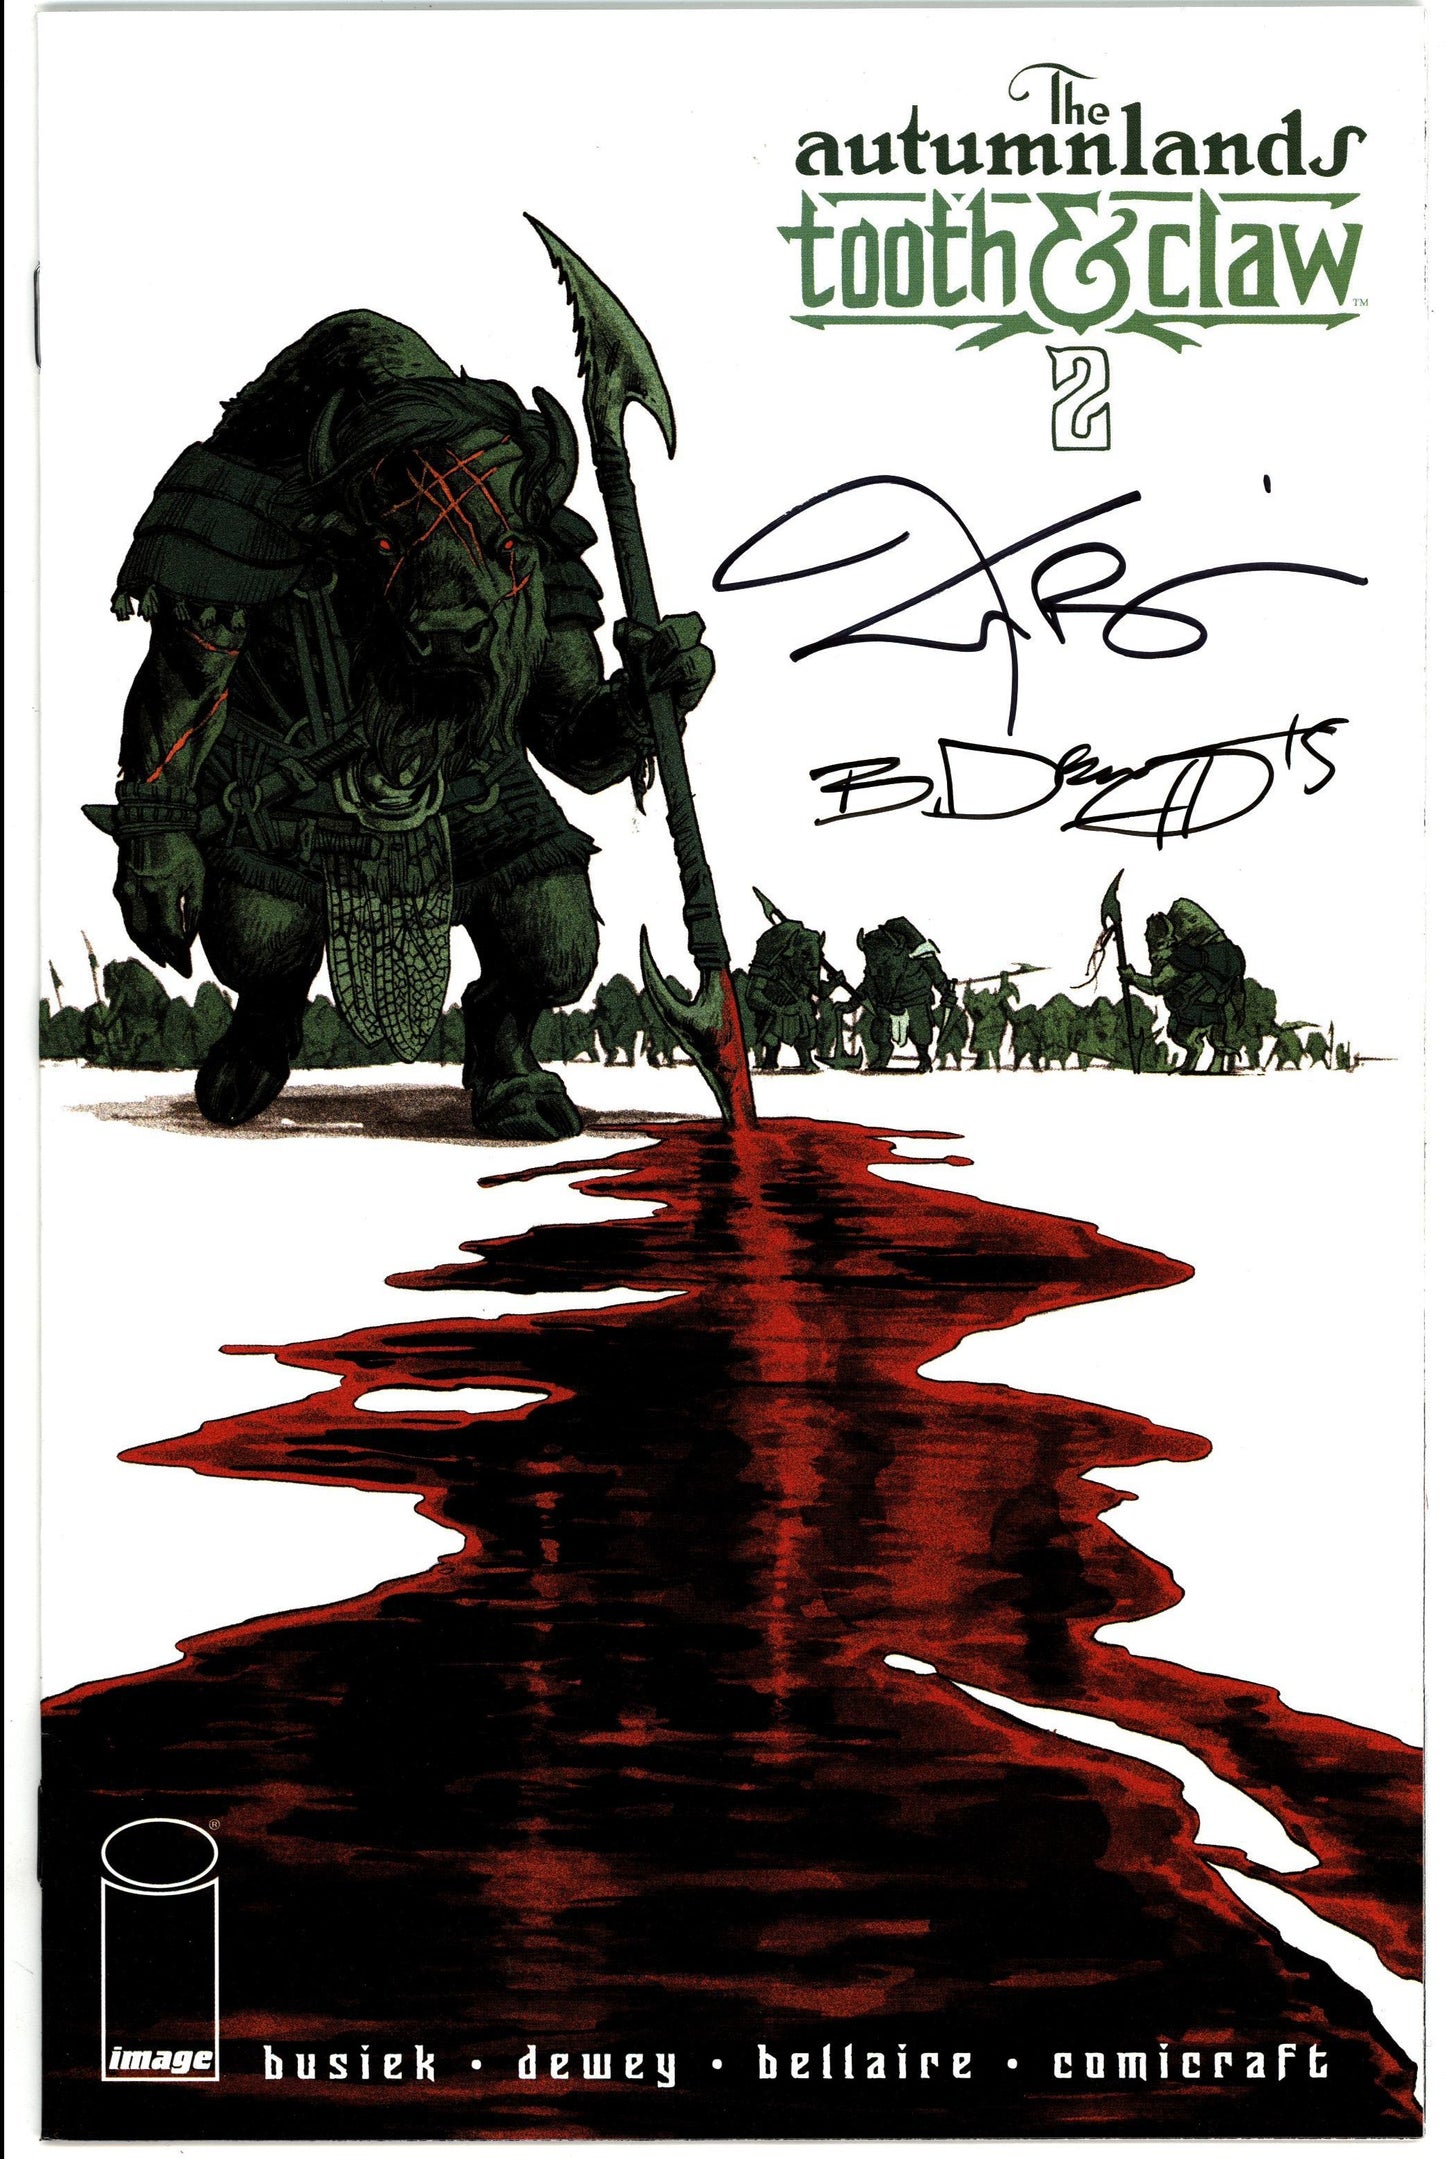 Autumnlands: Tooth & Claw #2 - Signed